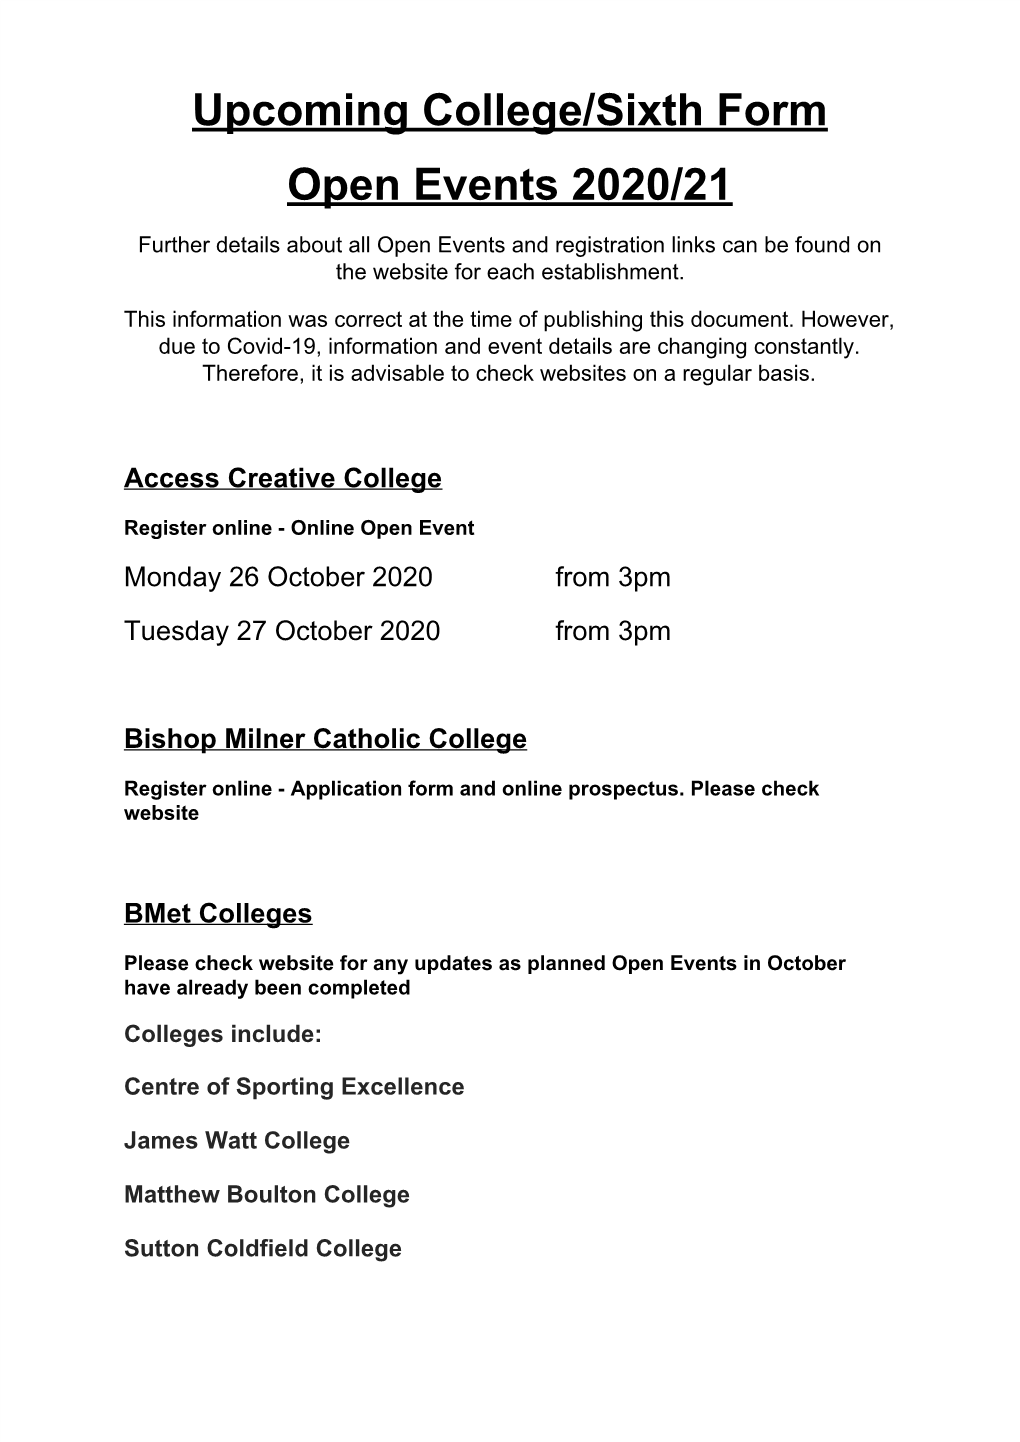 Upcoming College/Sixth Form Open Events 2020/21